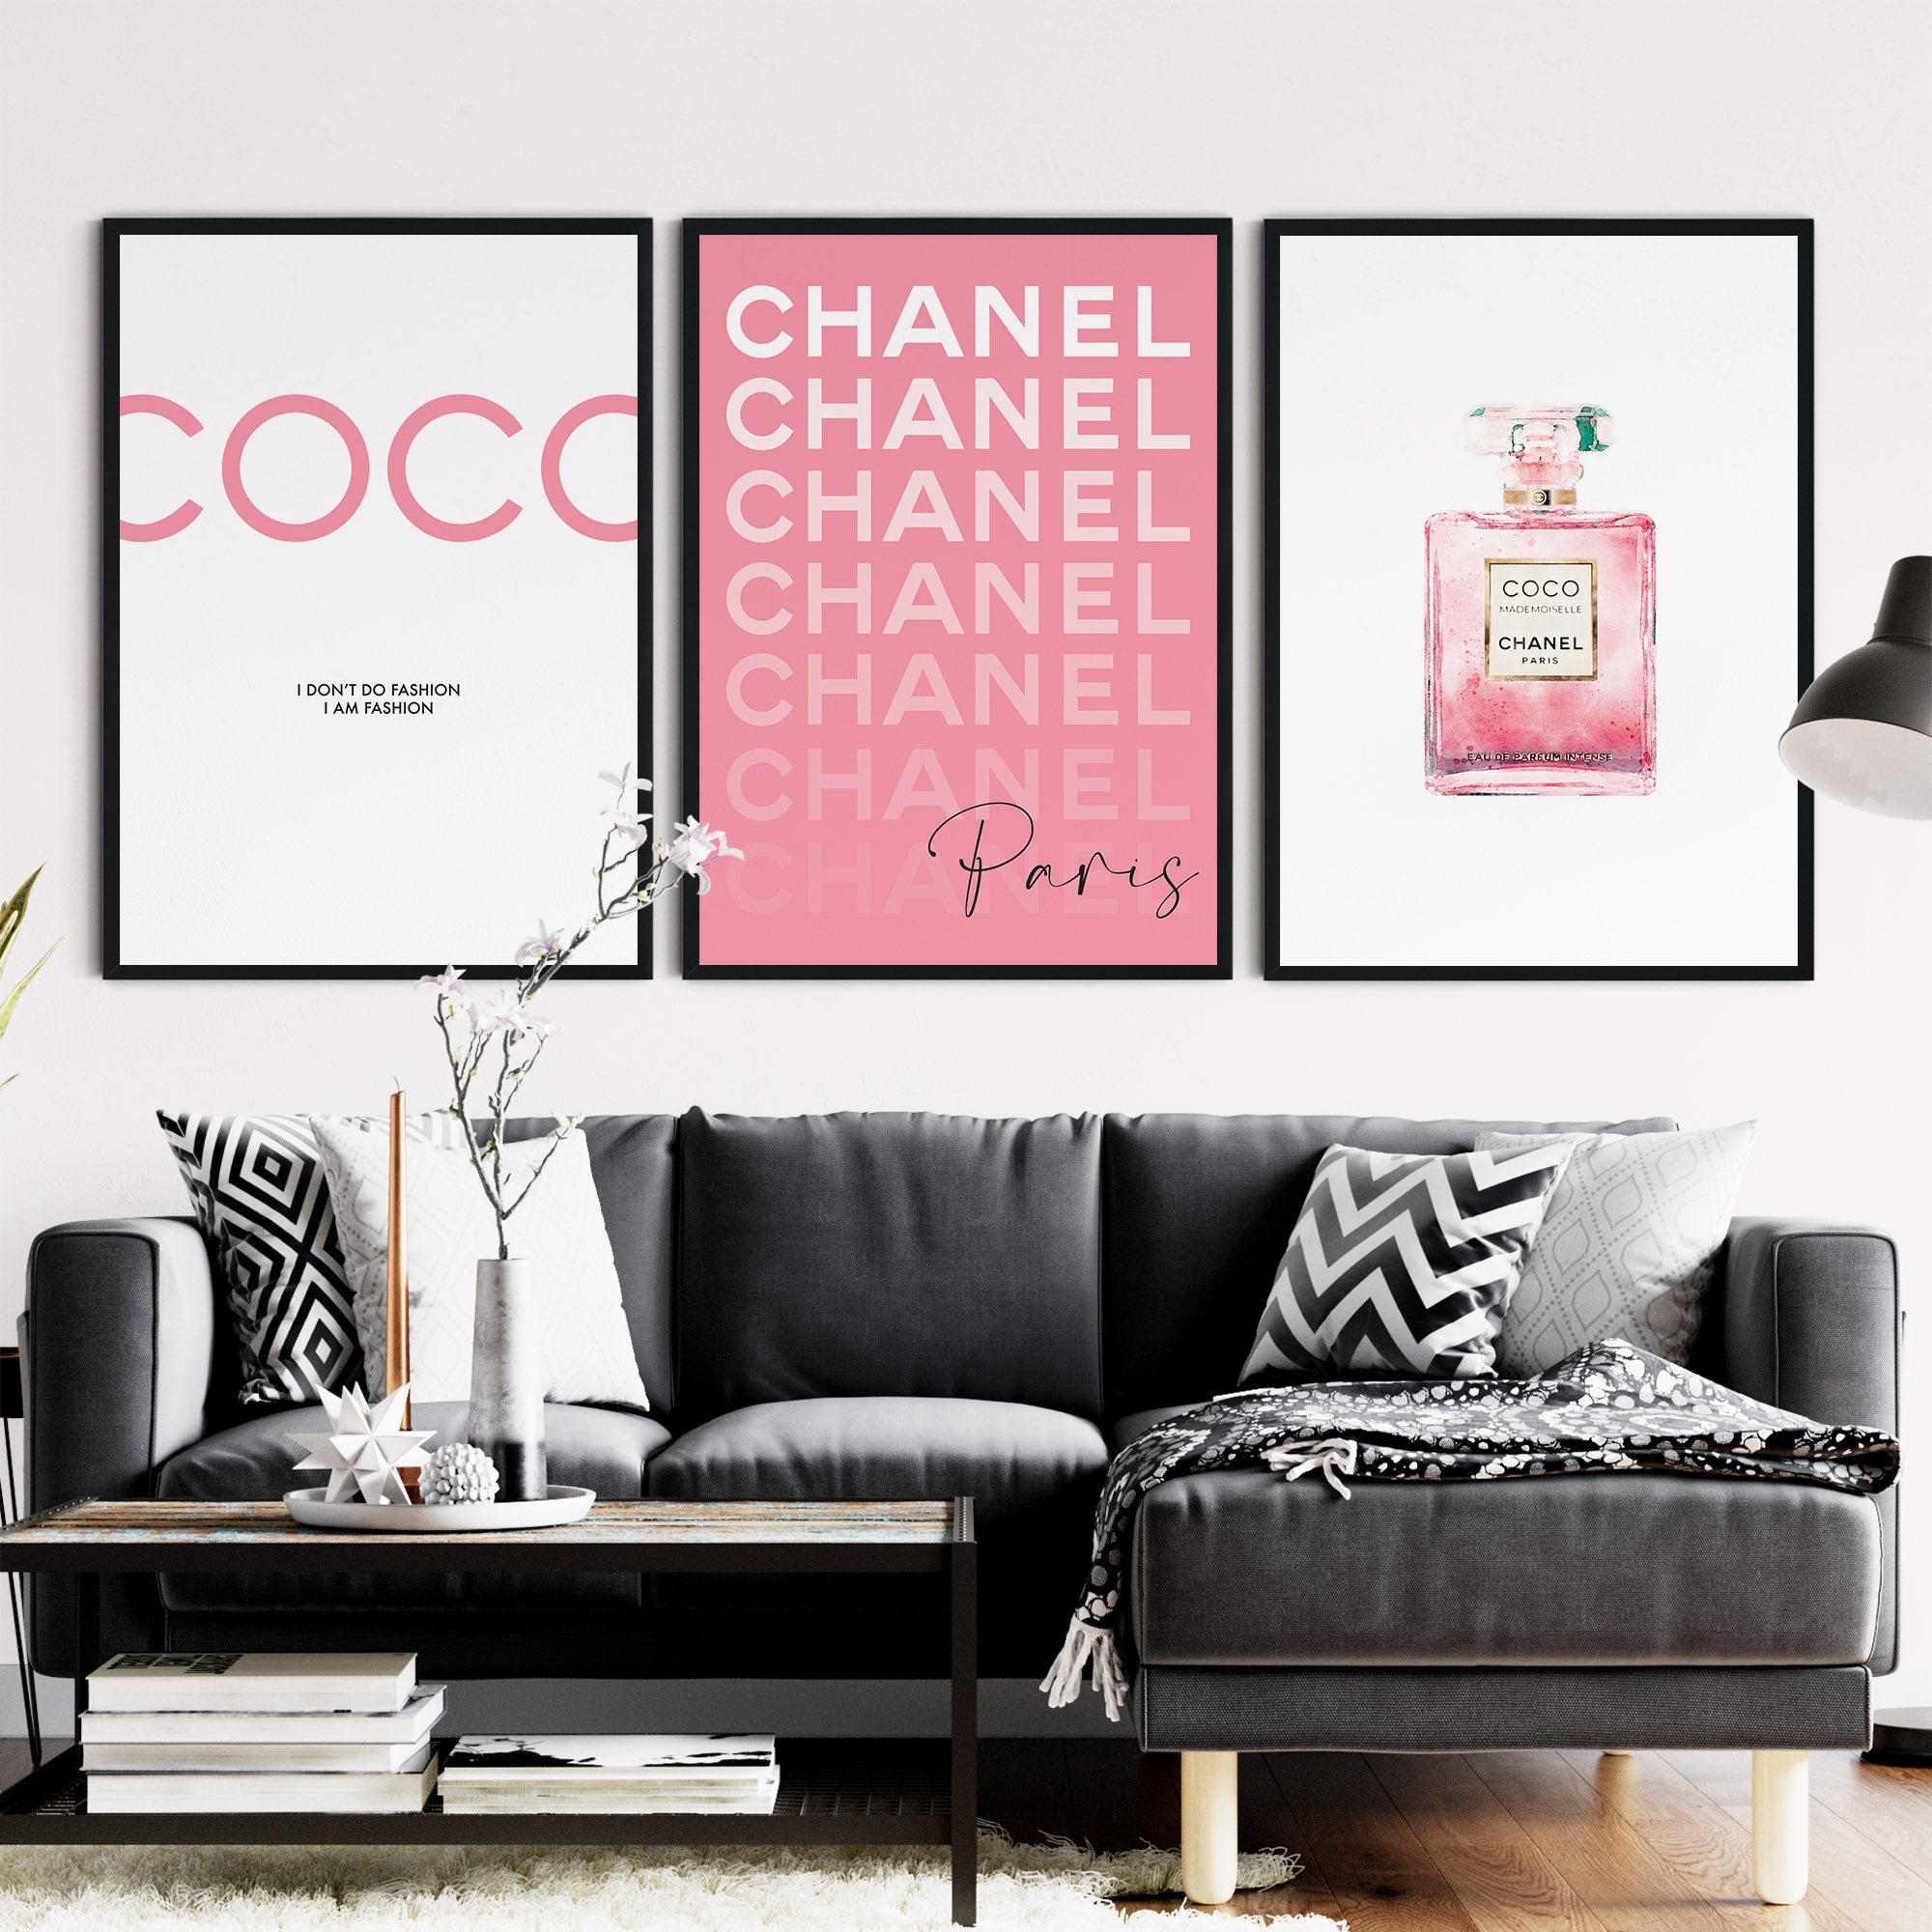 Set of 3 pink Chanel posters